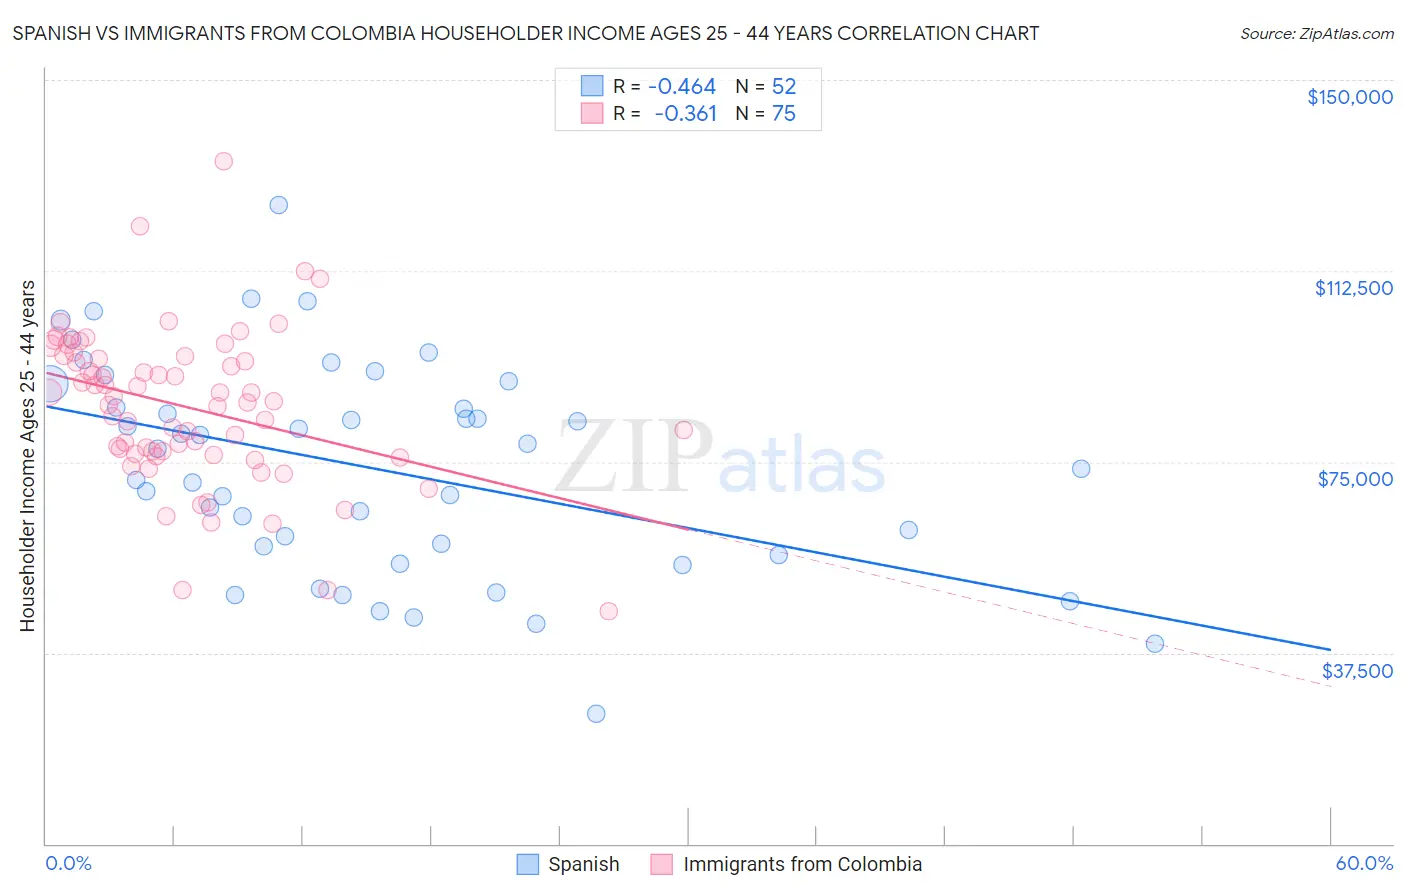 Spanish vs Immigrants from Colombia Householder Income Ages 25 - 44 years